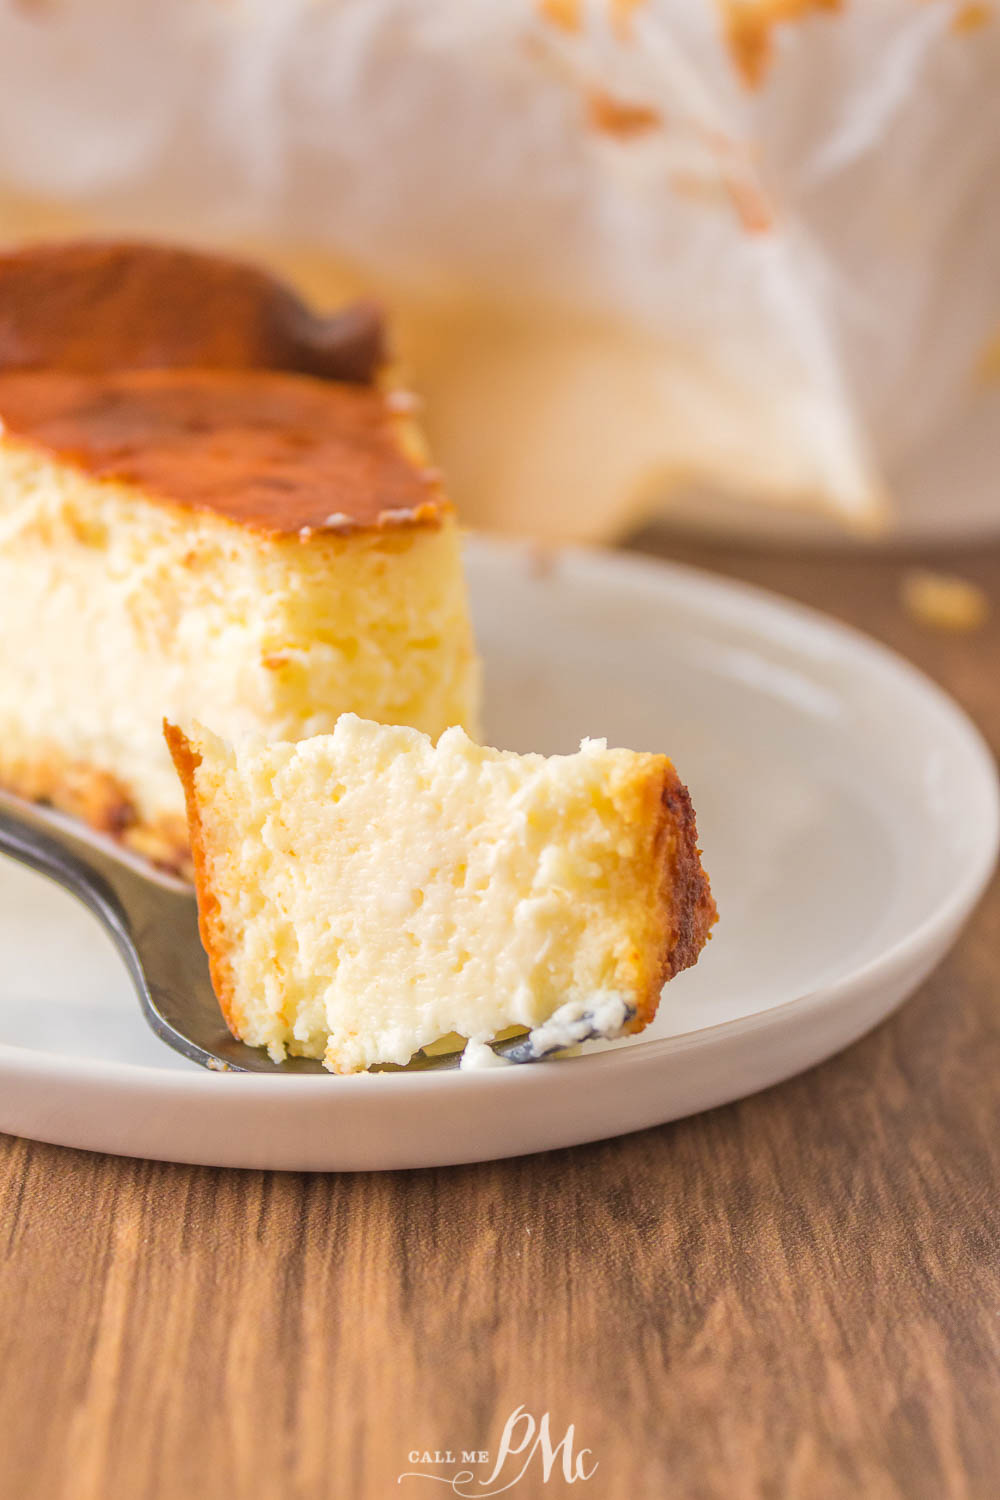 San Sebastian Basque Cheesecake is a traditional Spanish Basque cheesecake recipe. This cheesecake is crustless and has a, purposely, scorched top and velvety smooth inside. It's perfectly light, creamy, smooth, and perfectly caramelized. It's unique, delicious, and very easy to make!